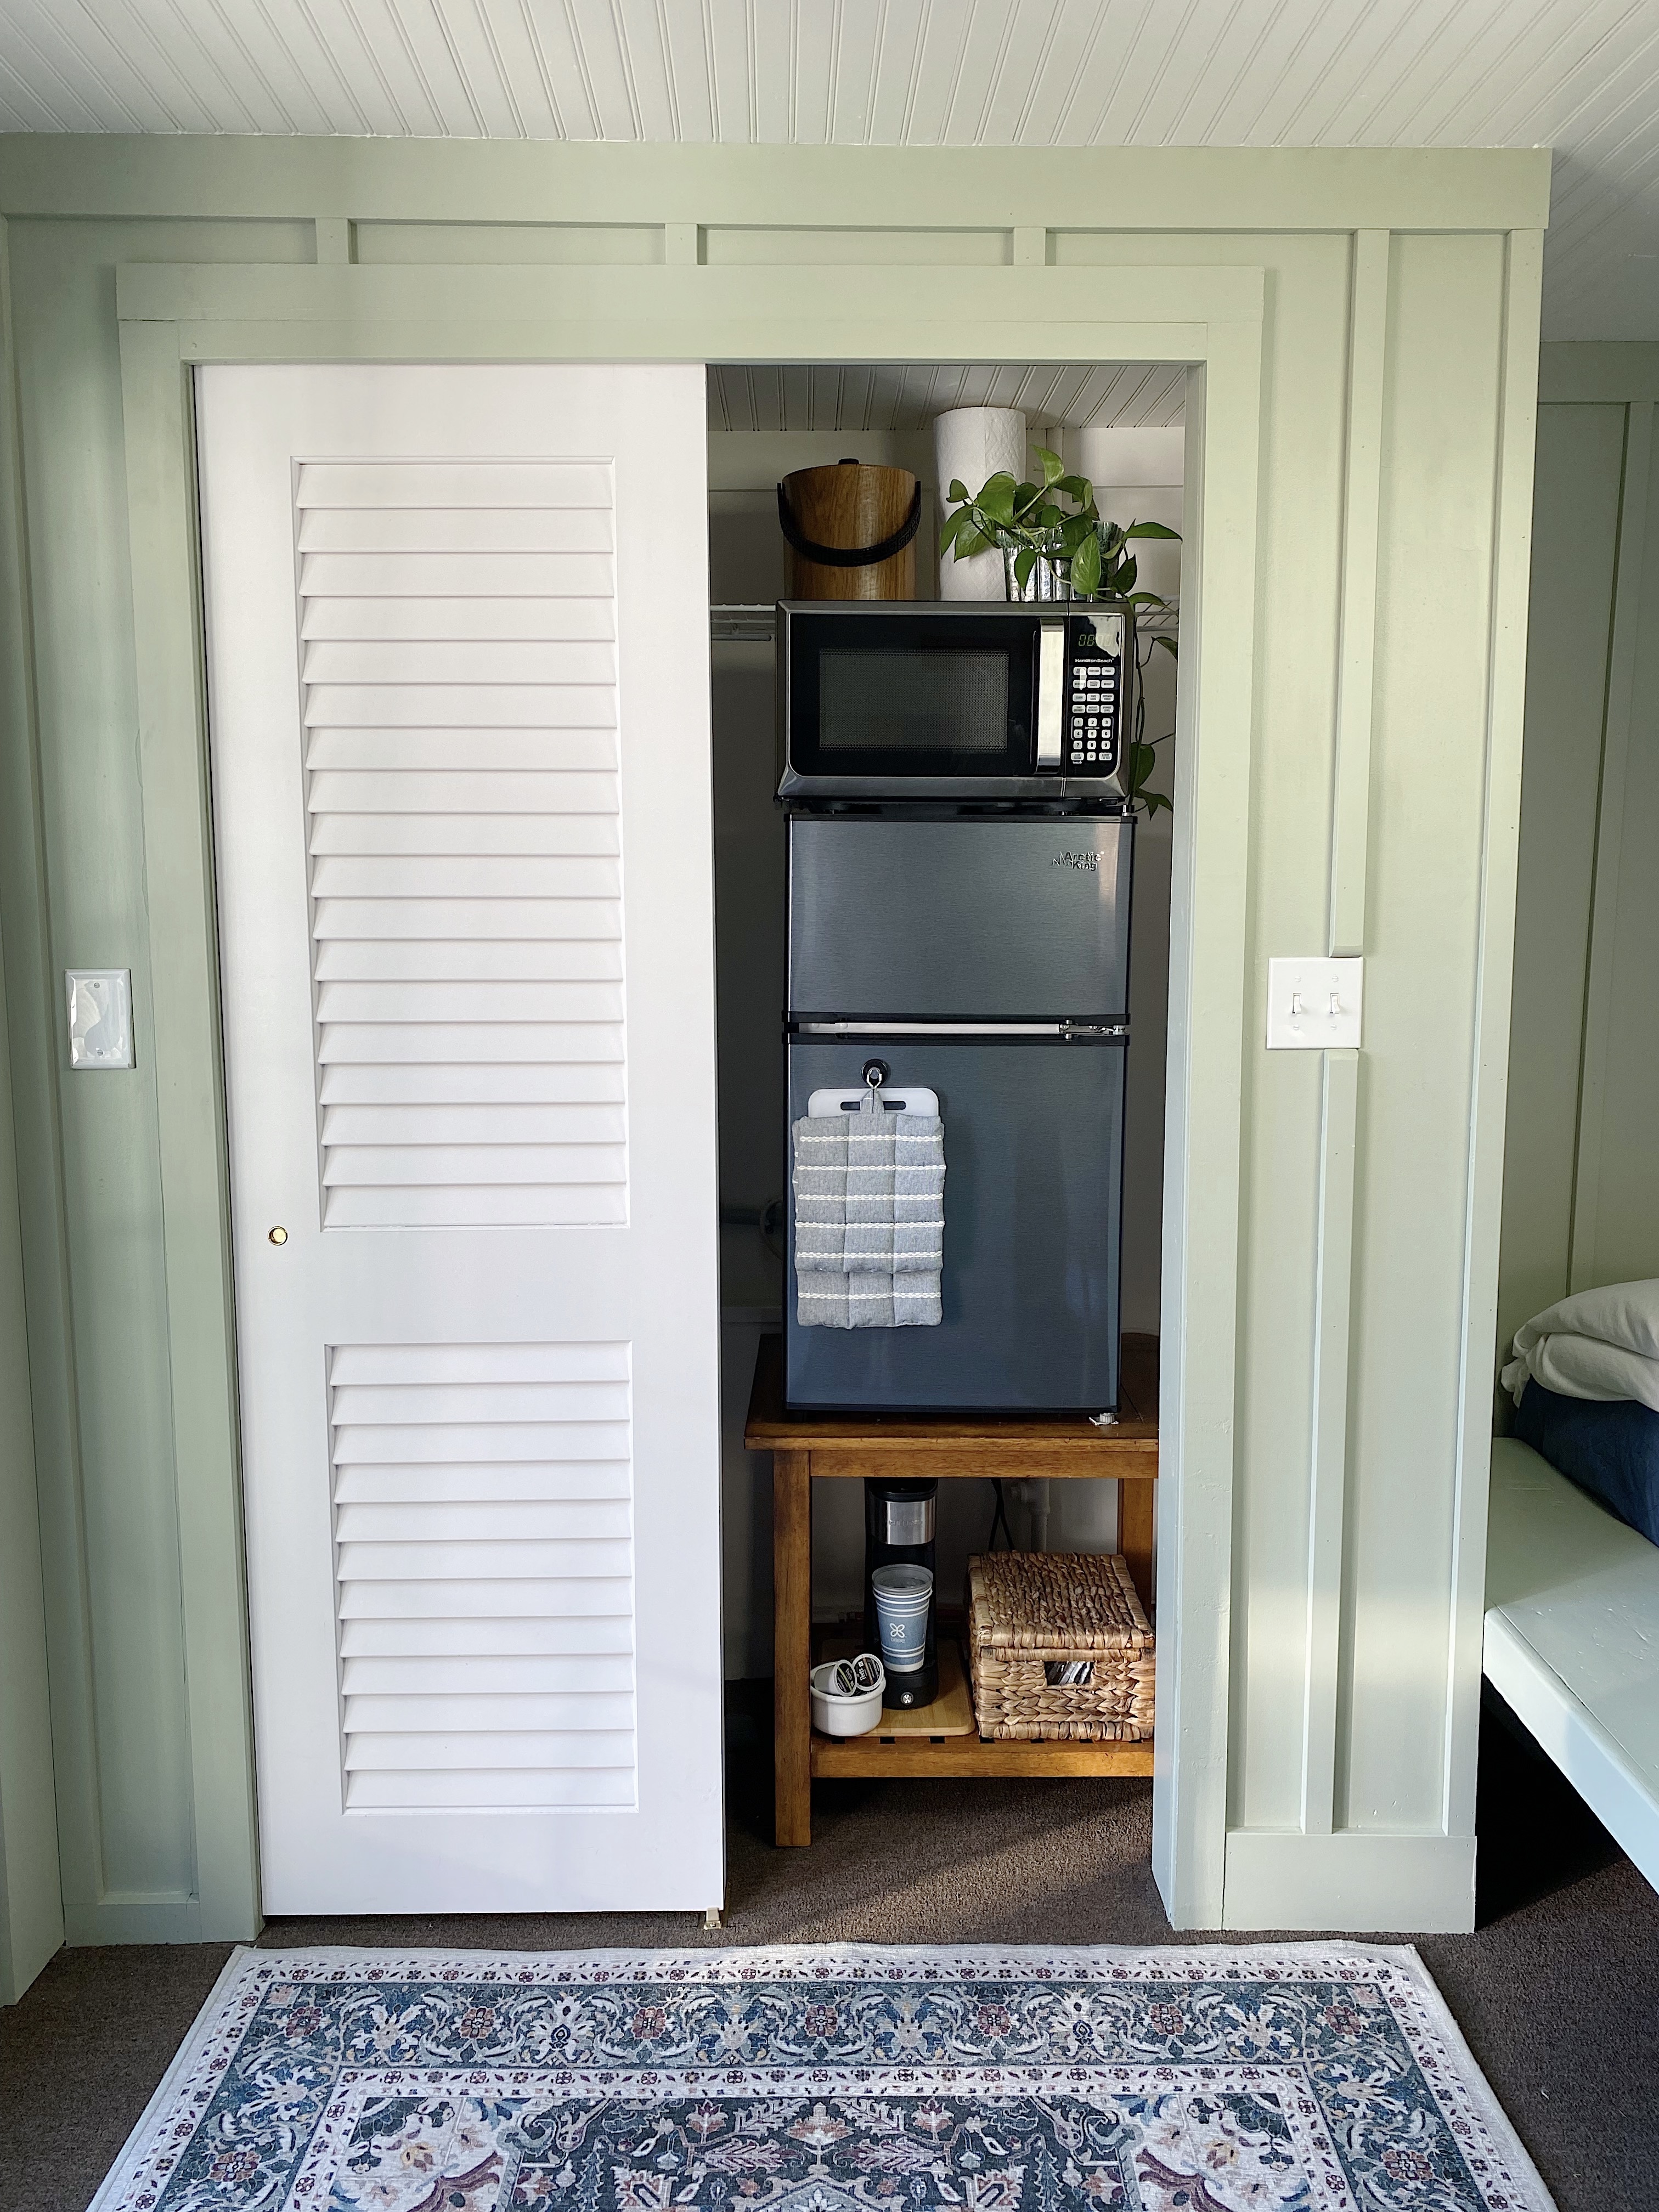 Mini kitchen in a closet with white louvered doors, green board and batten walls and oriental rug